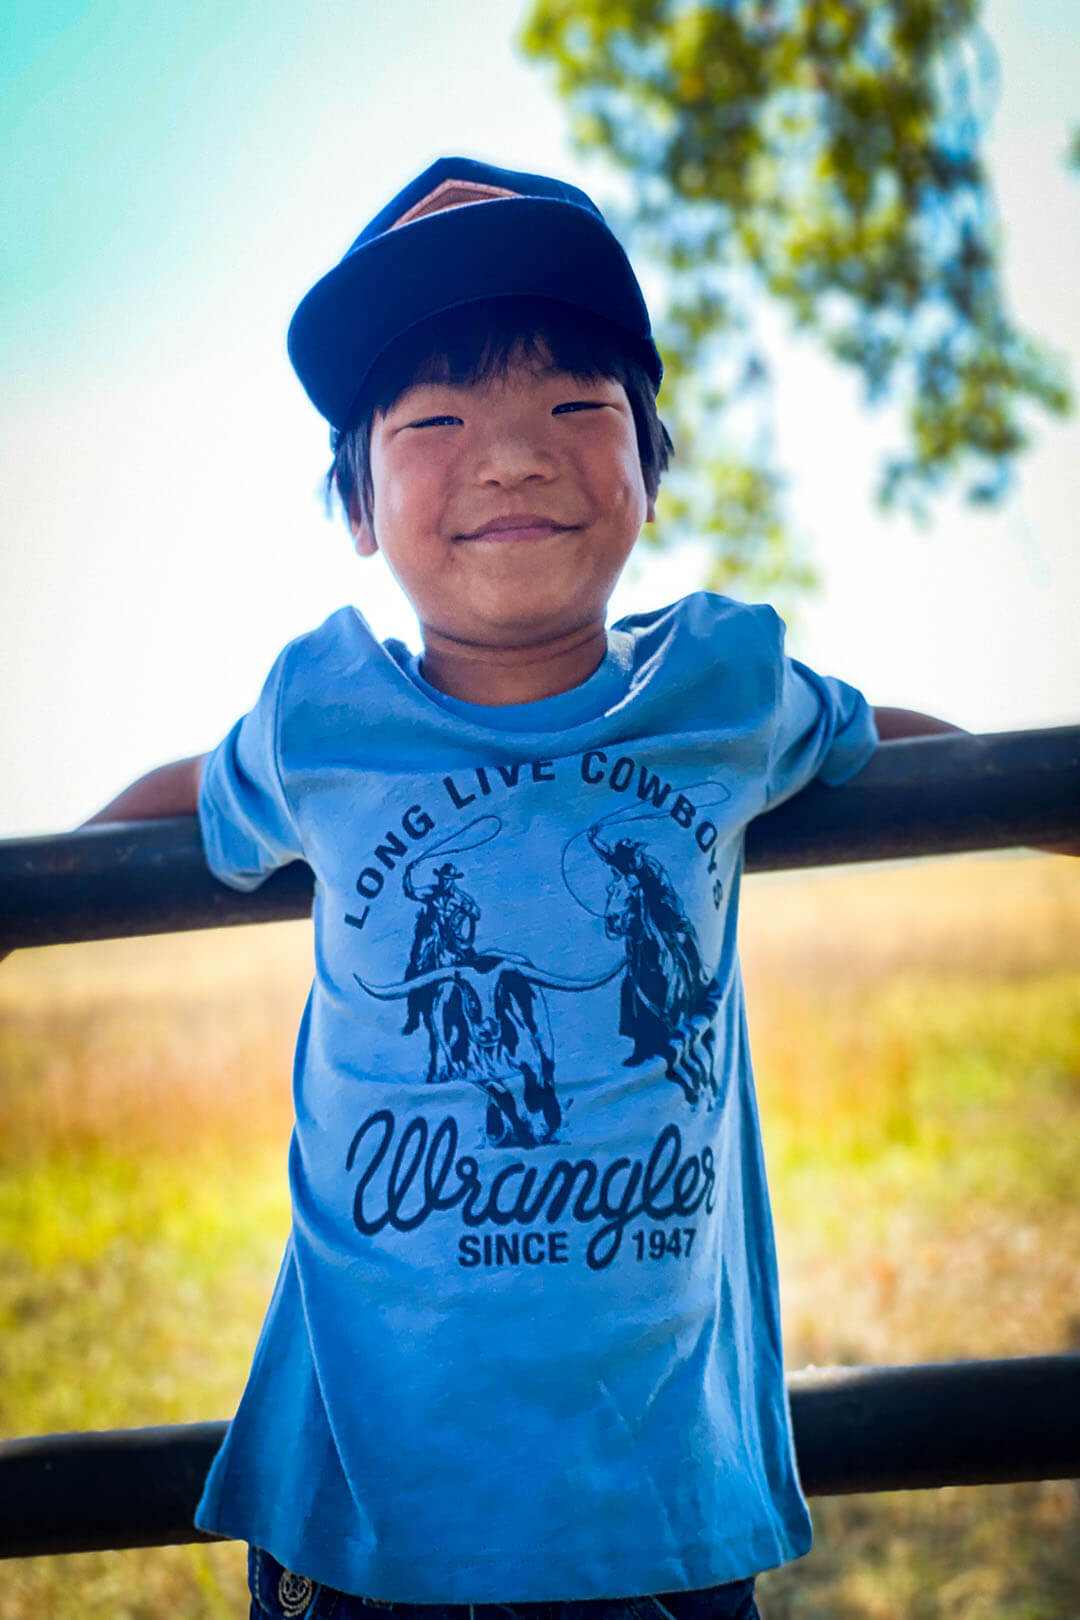 Boy wearing navy ball cap light blue t-shirt with navy blue writing that says long live cowboys wrangler since 1947 cowboys on horses roping bull